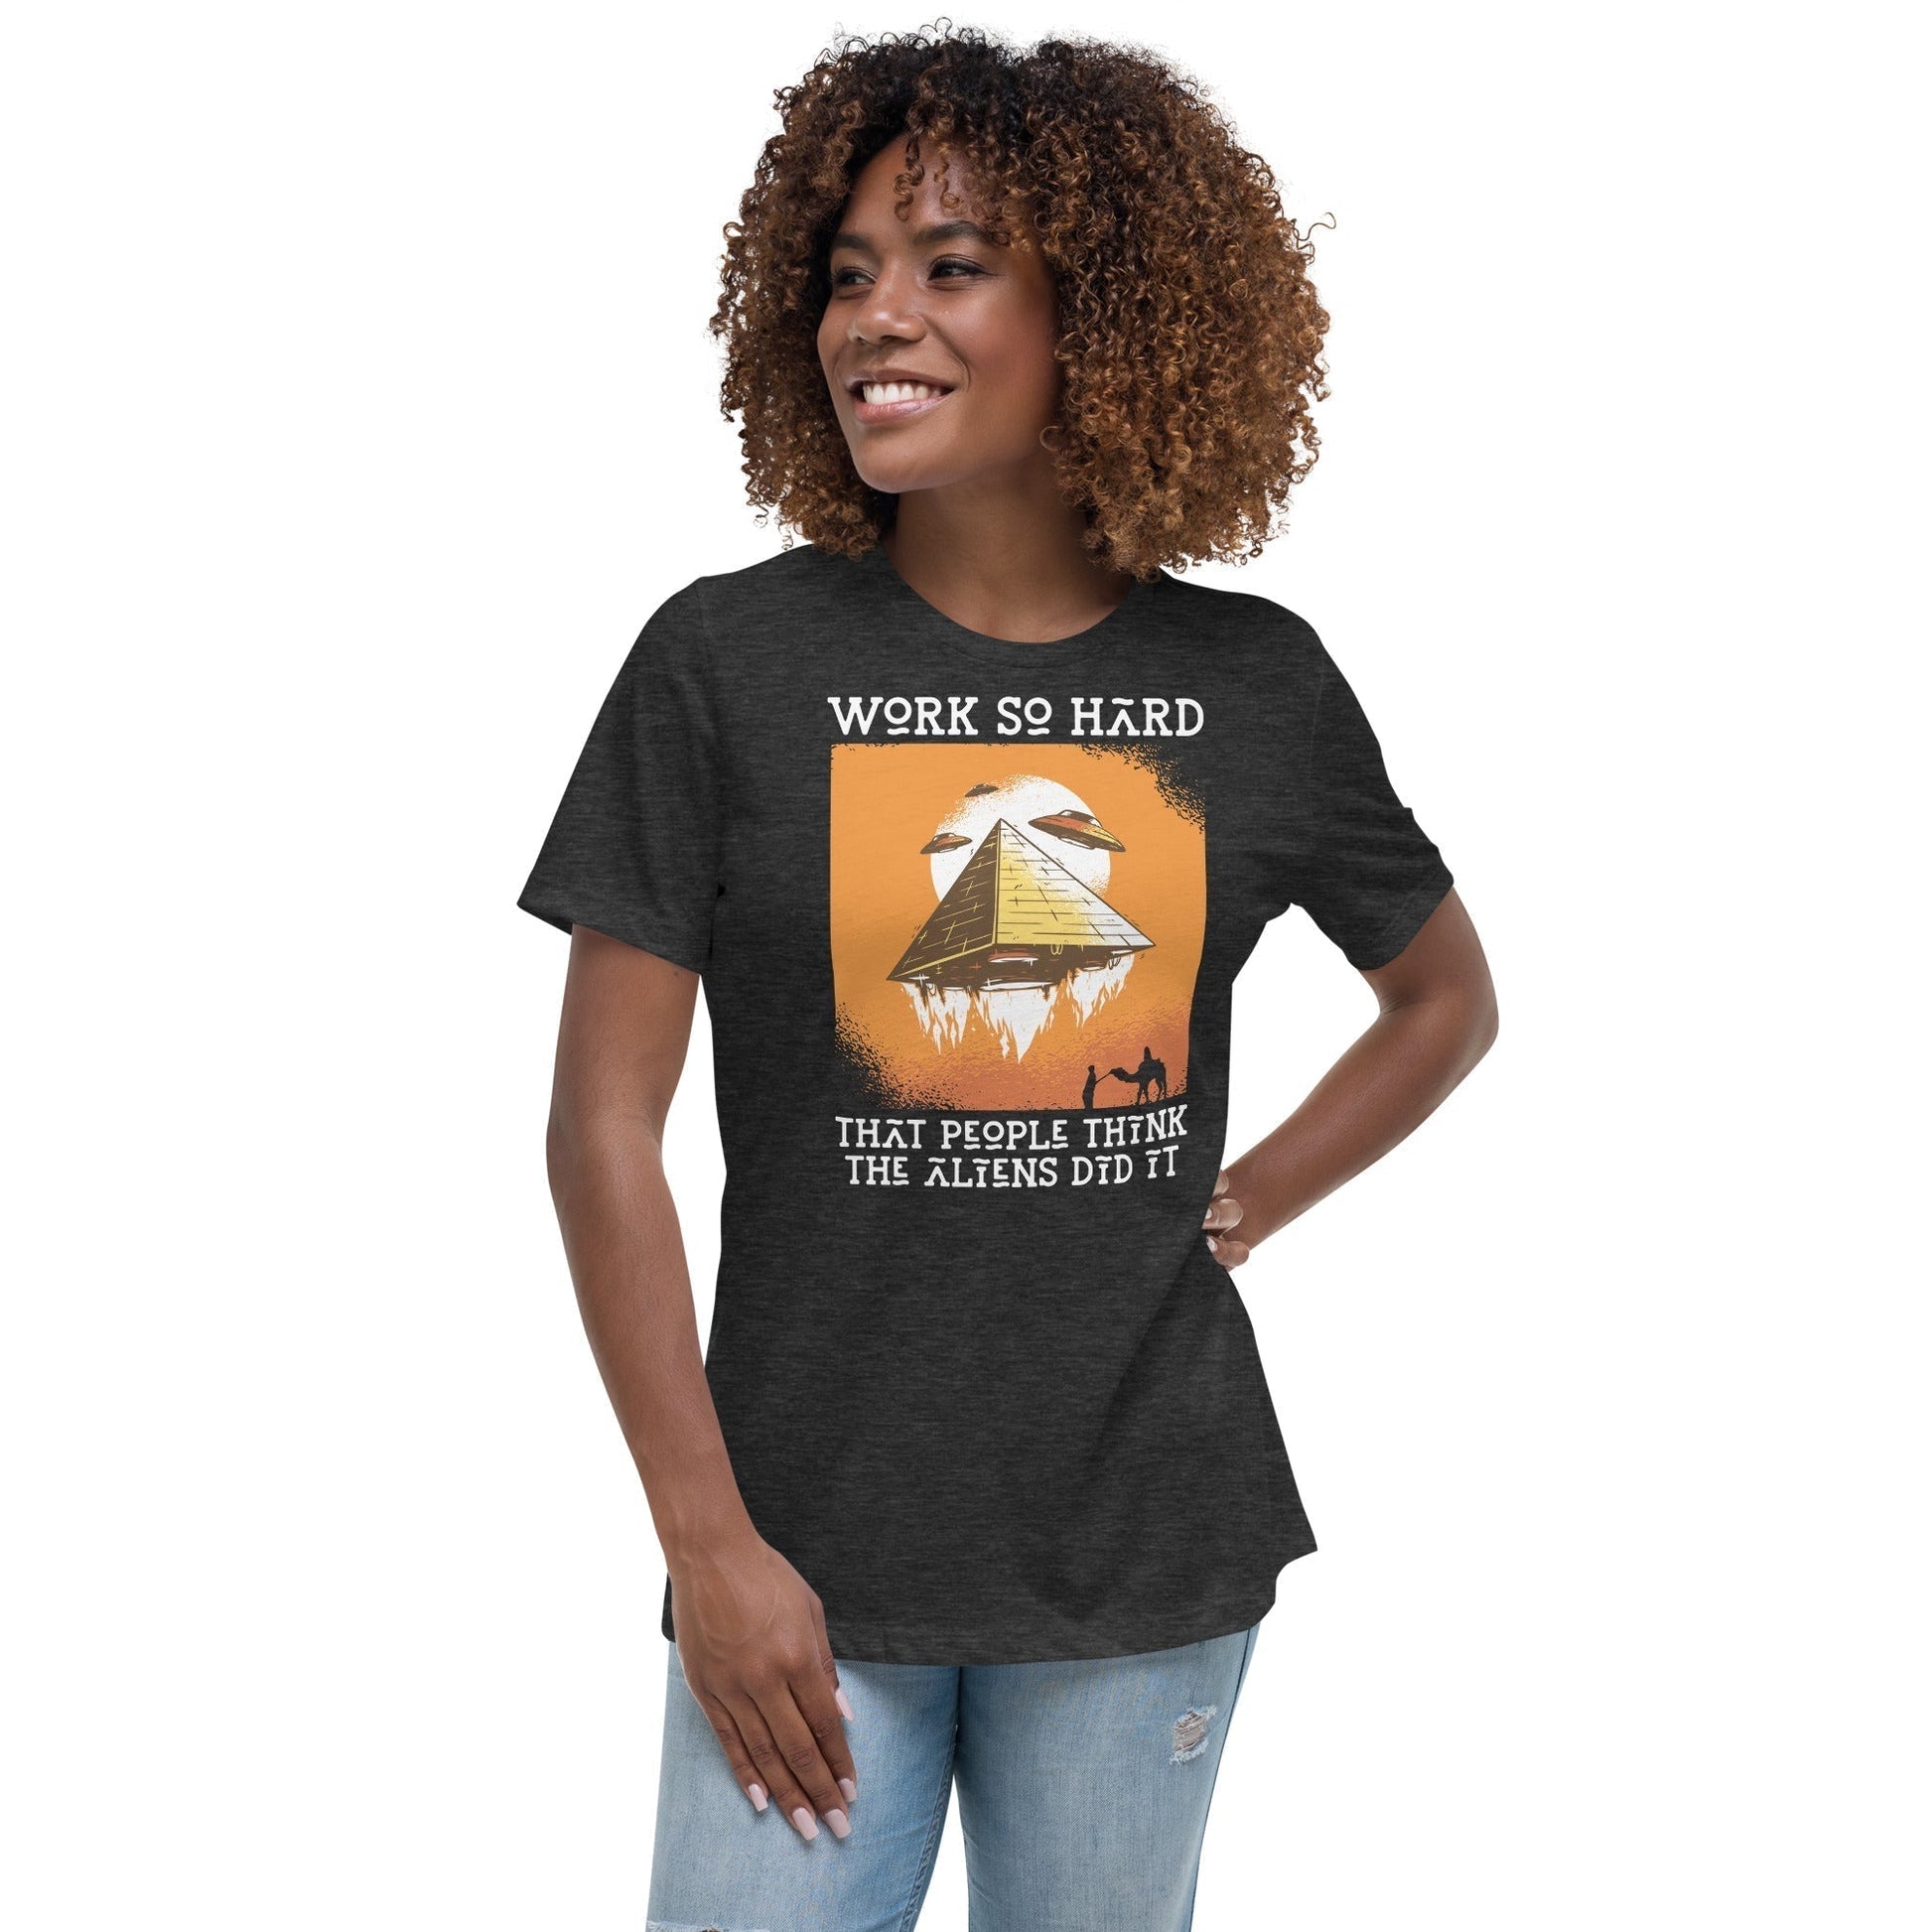 Work so hard that people think the aliens did it - Women's T-Shirt